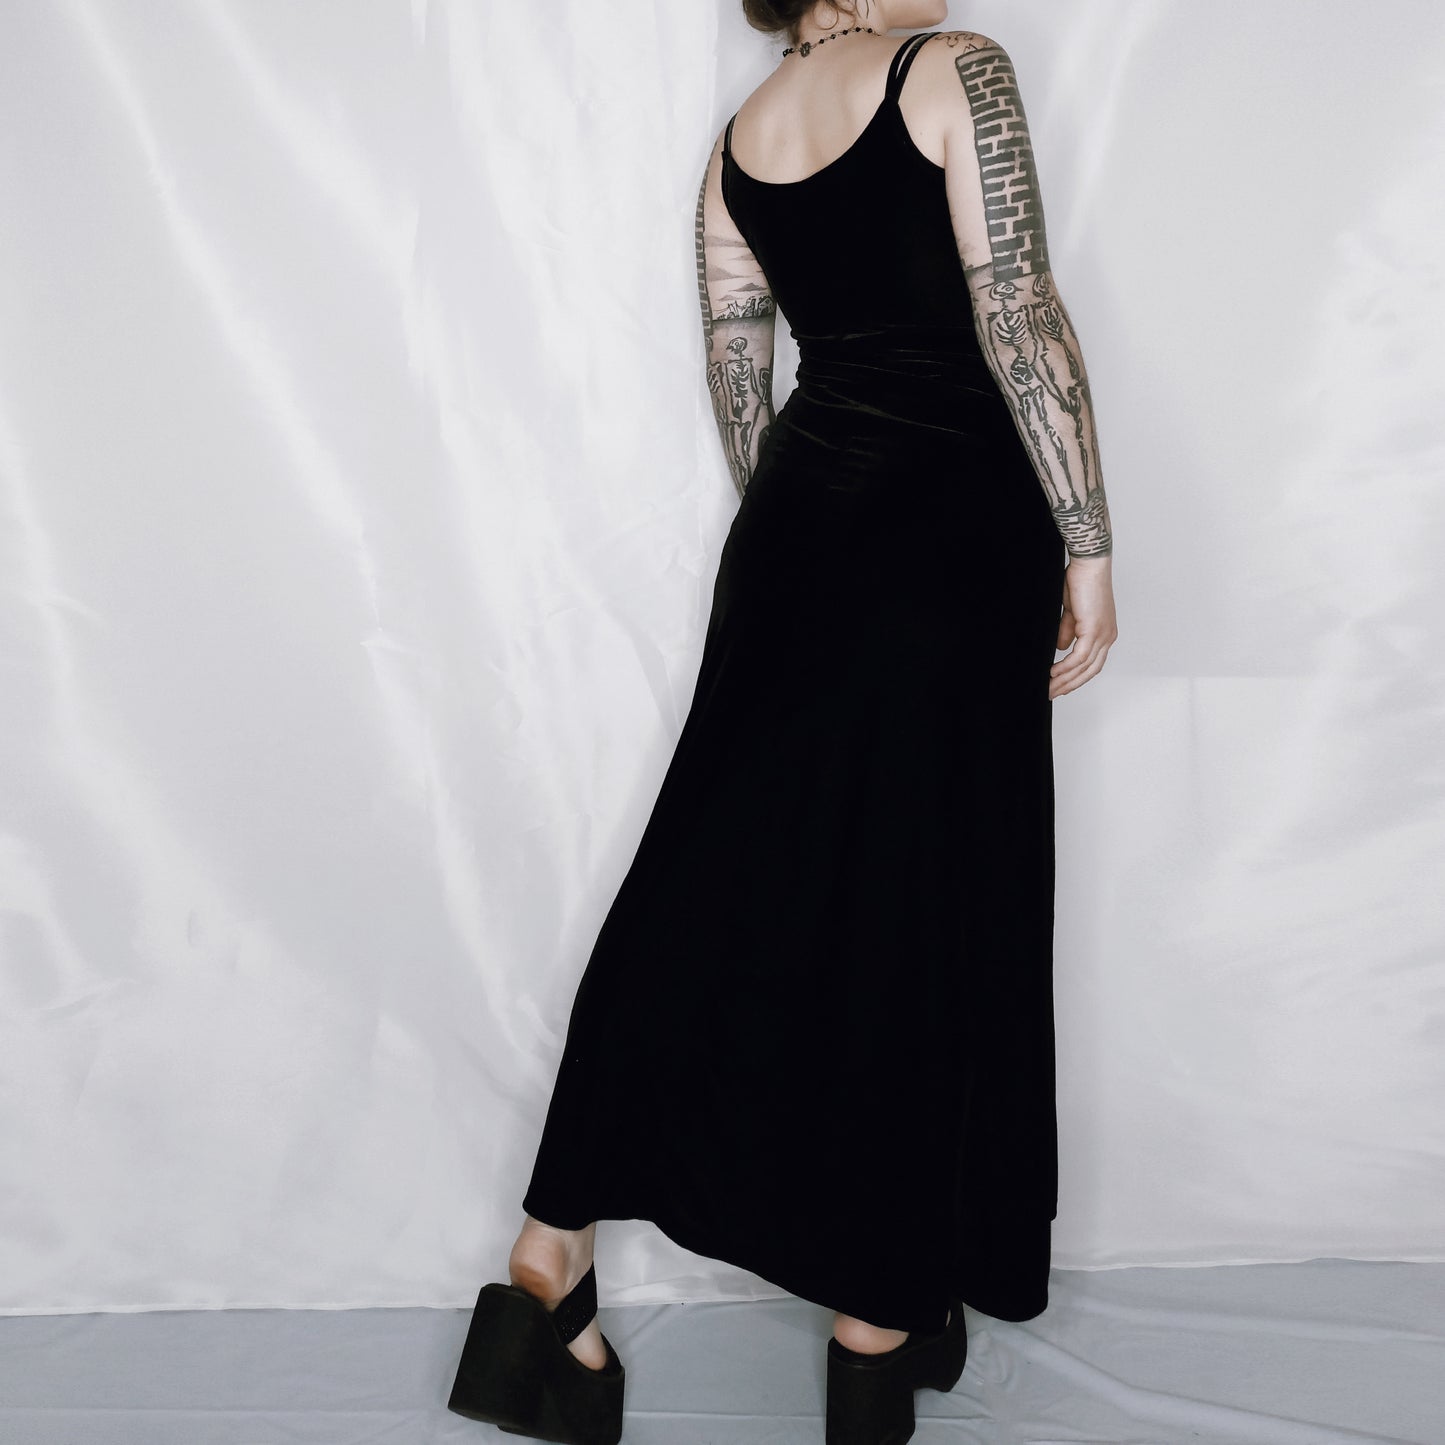 Velvet Cut Out Sheer Embroidery Dress - S/M